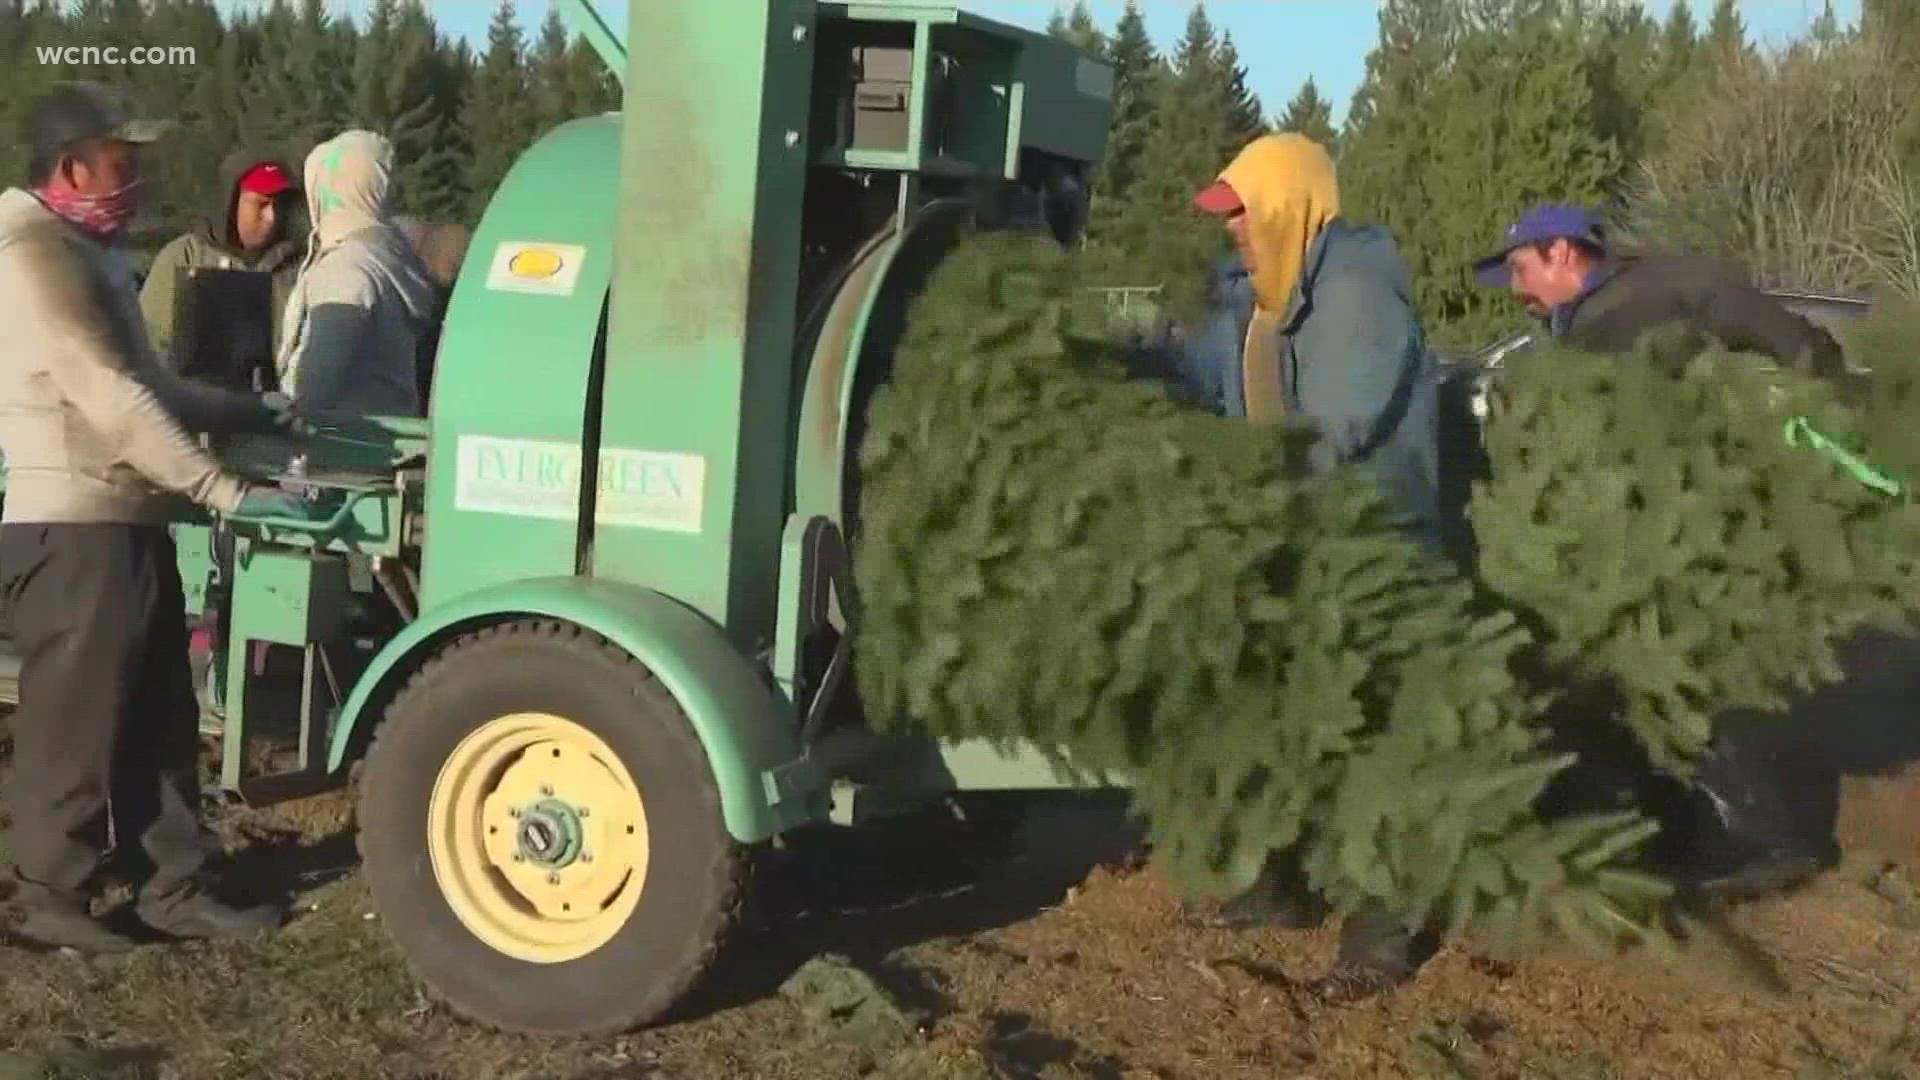 Andrew Bosserman, who was an owner and operator of a Christmas tree farm as well as an attorney, speaks with WCNC Charlotte about what farmers should know.